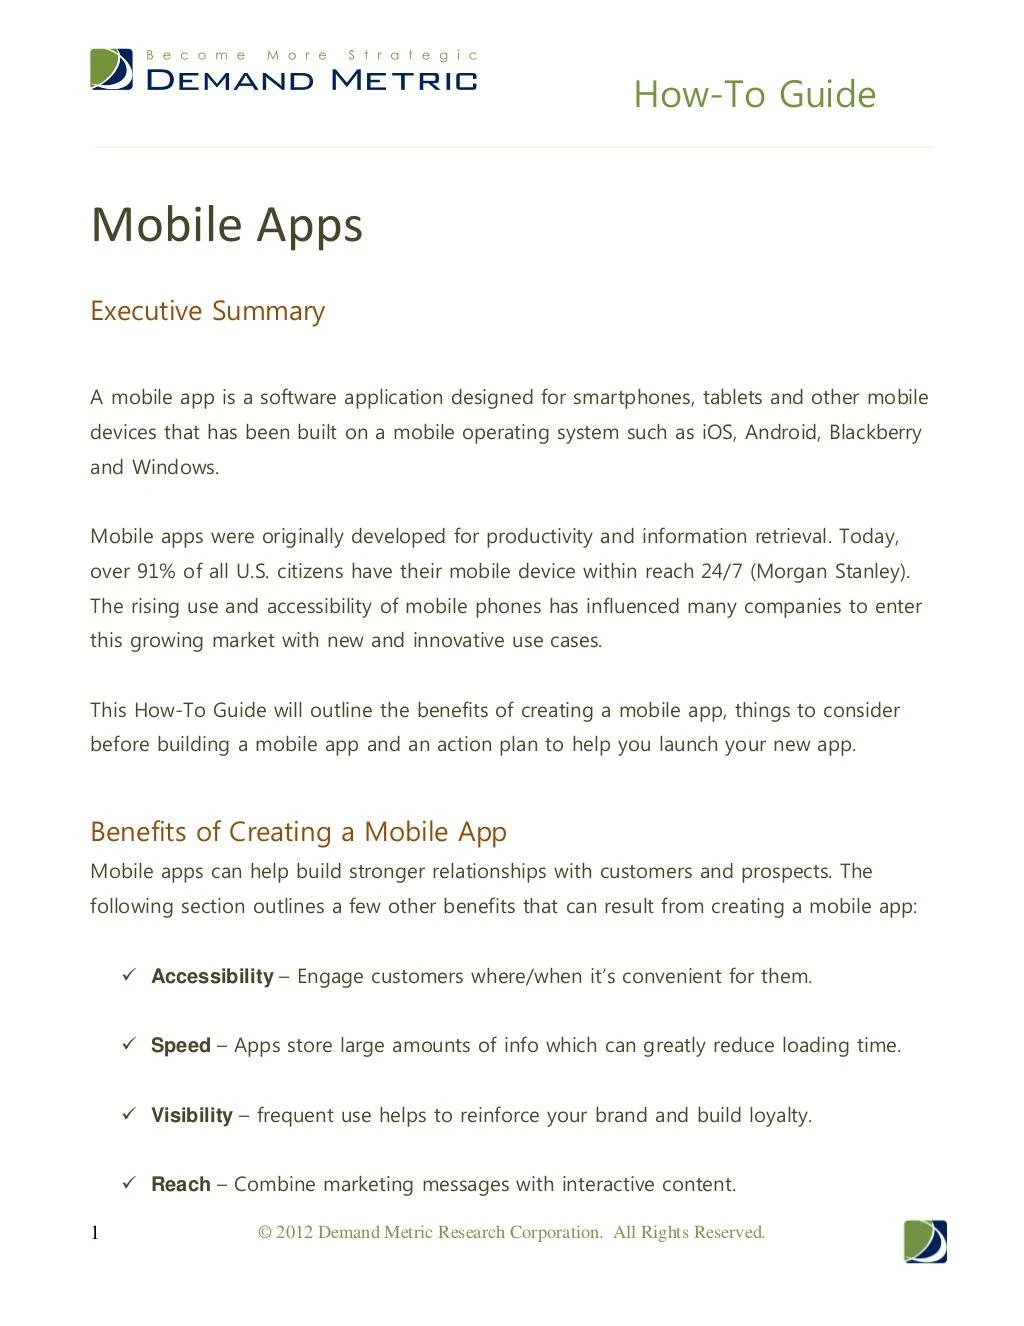 a mobile app launch guide